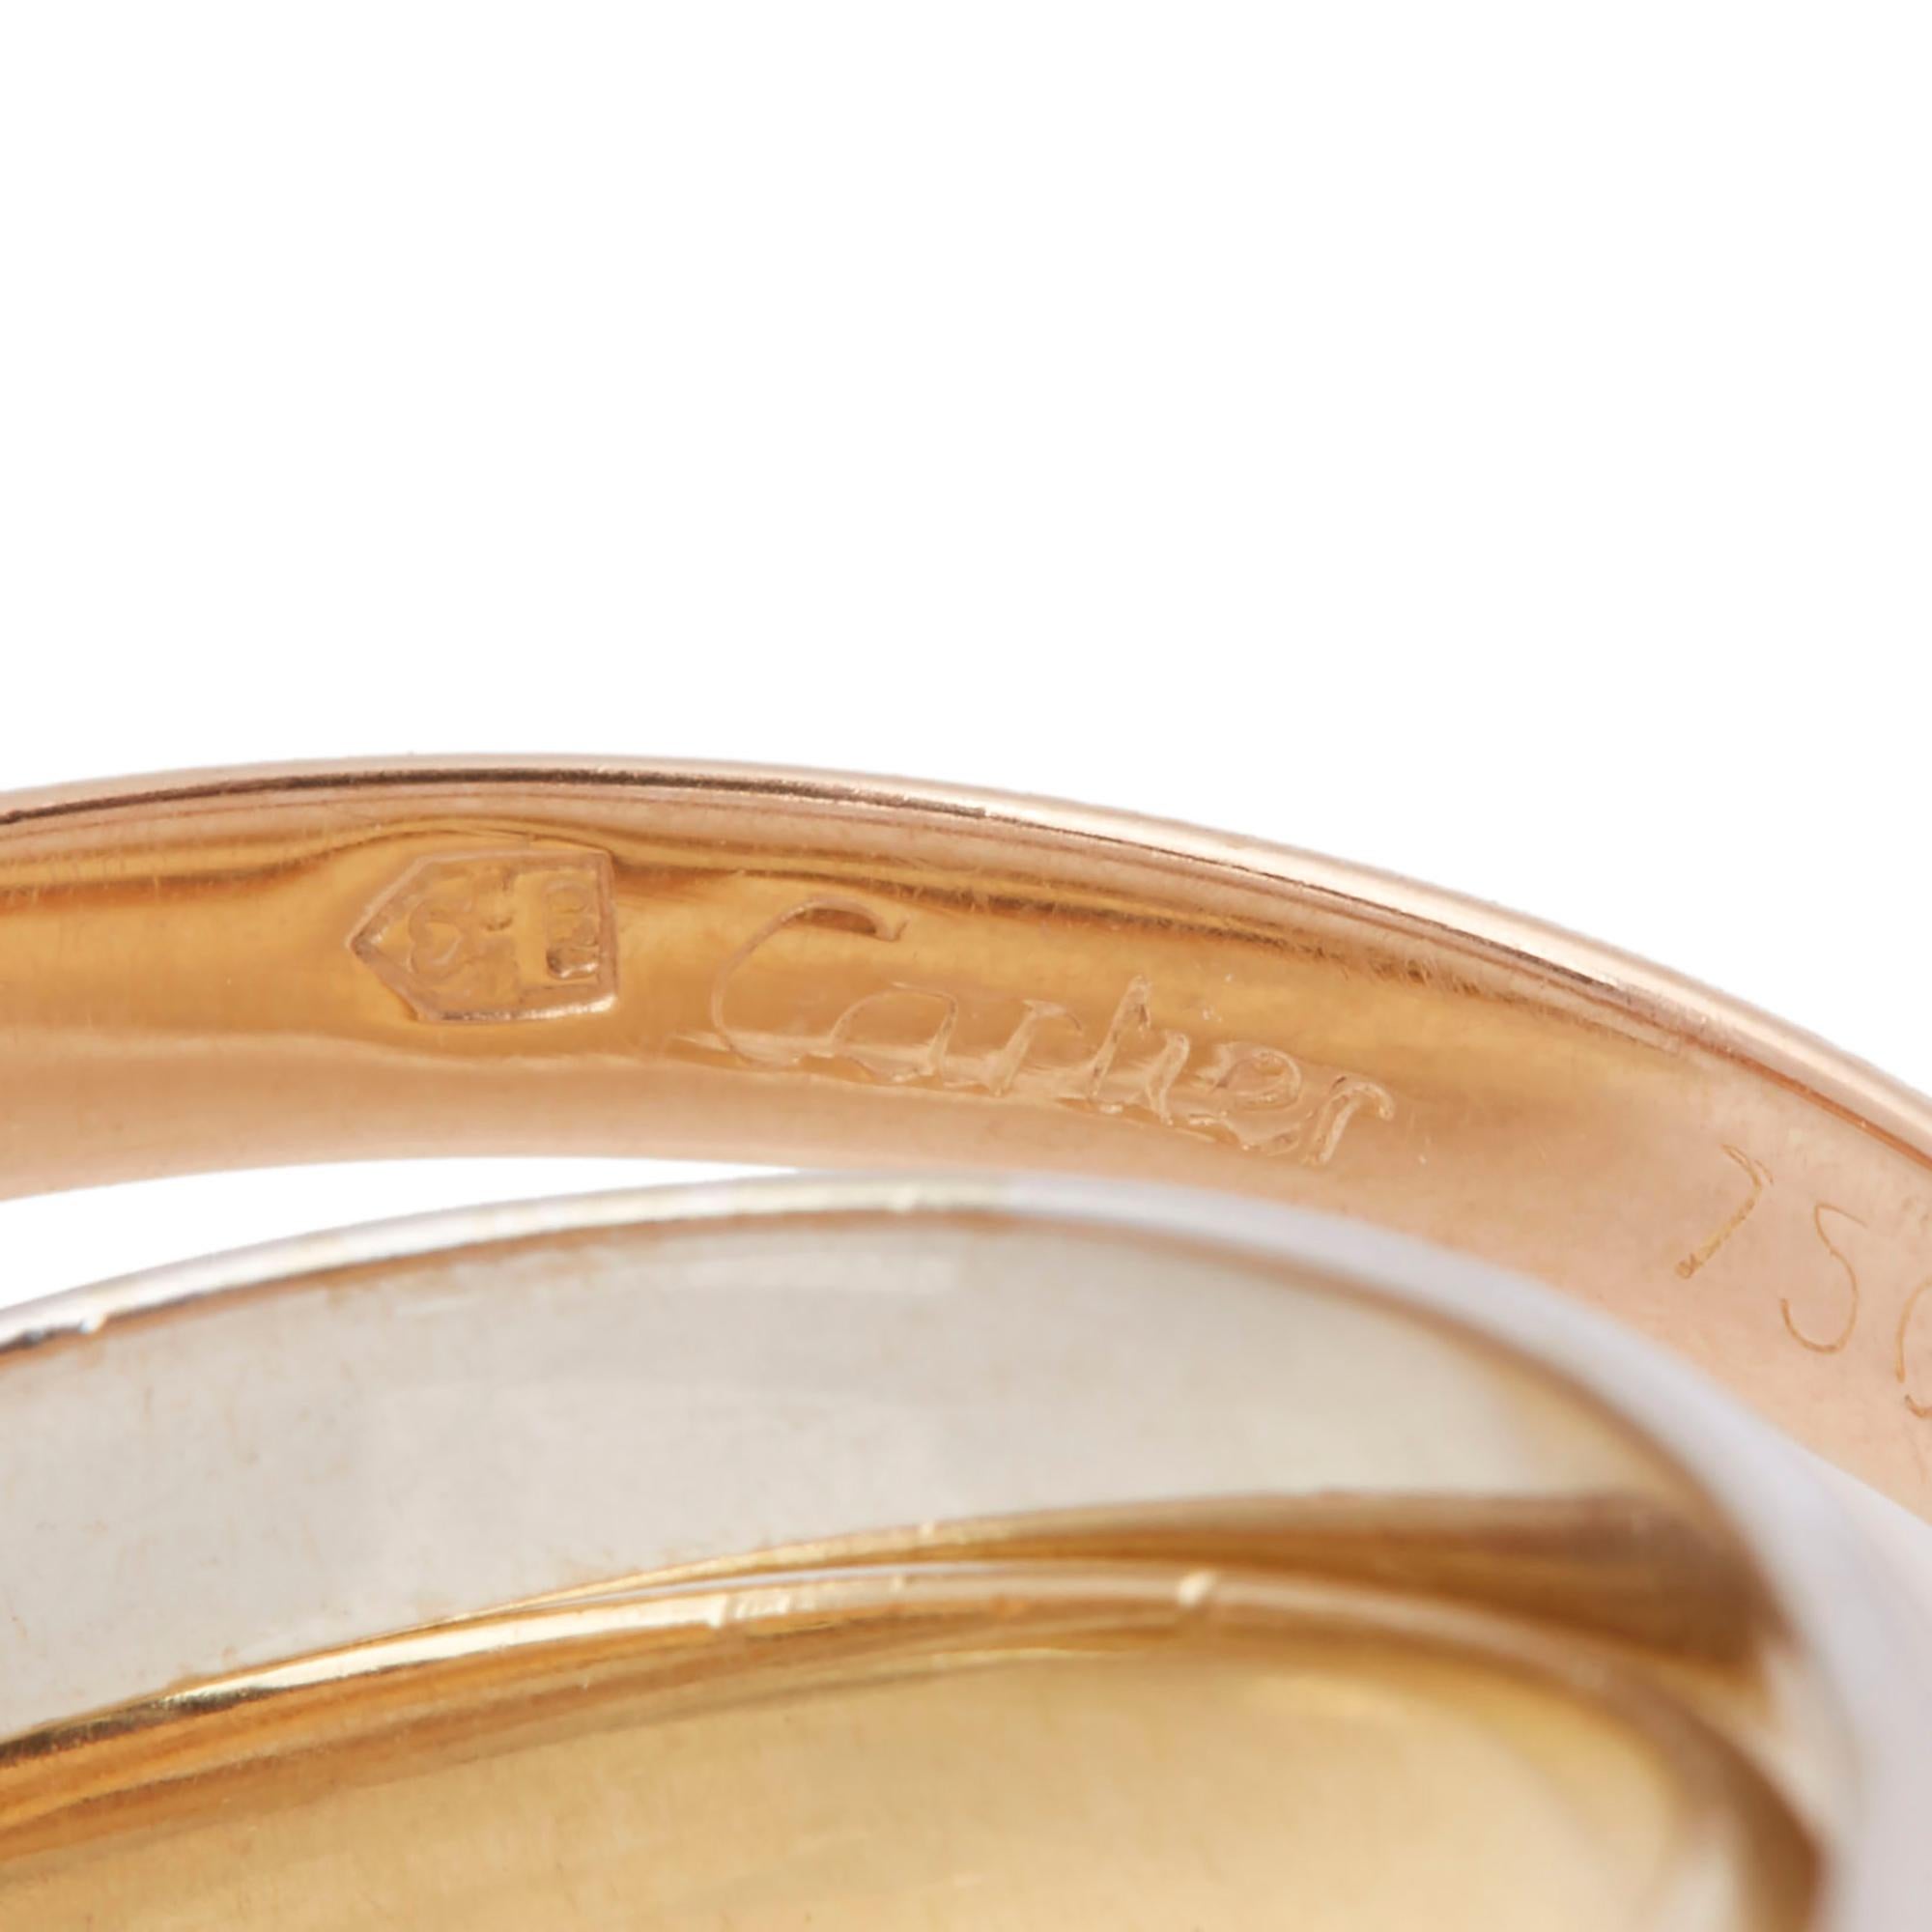 Modern Cartier 18 Karat Yellow, White and Rose Gold Small Trinity Band Ring